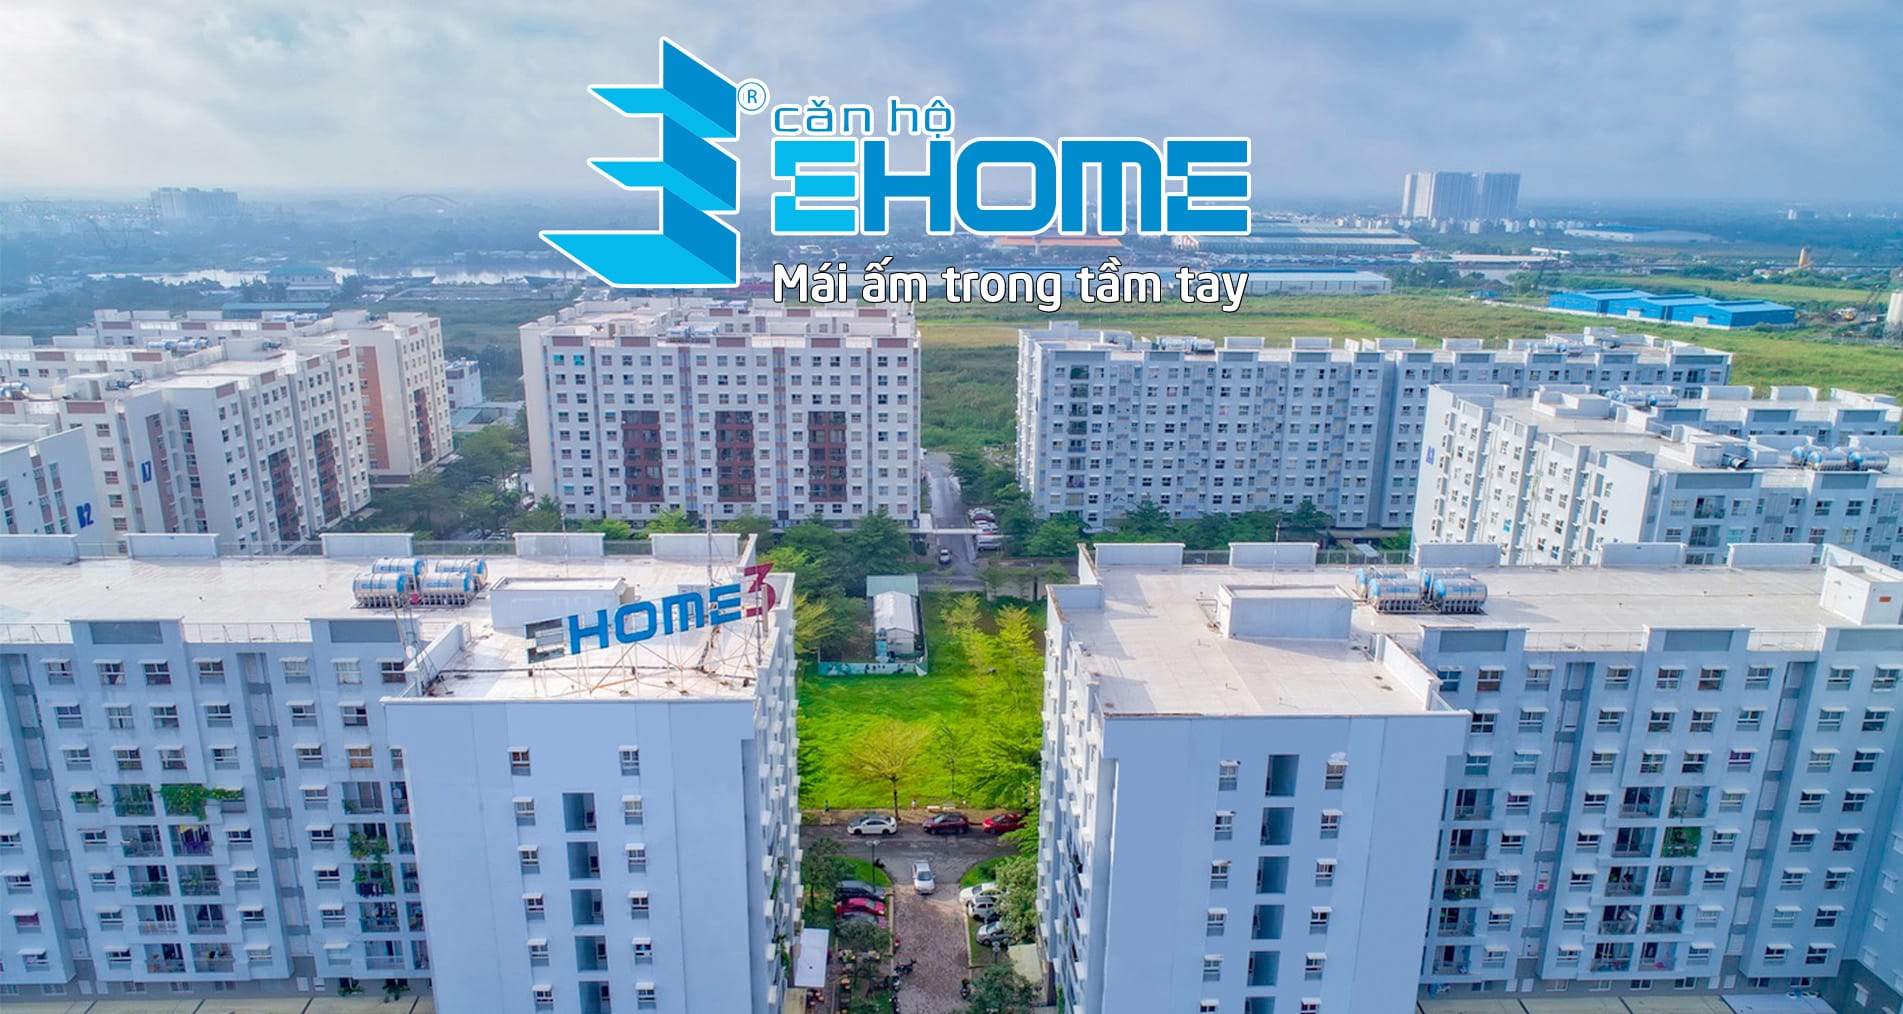 banner EHOME - NAM LONG GROUP (NLG)